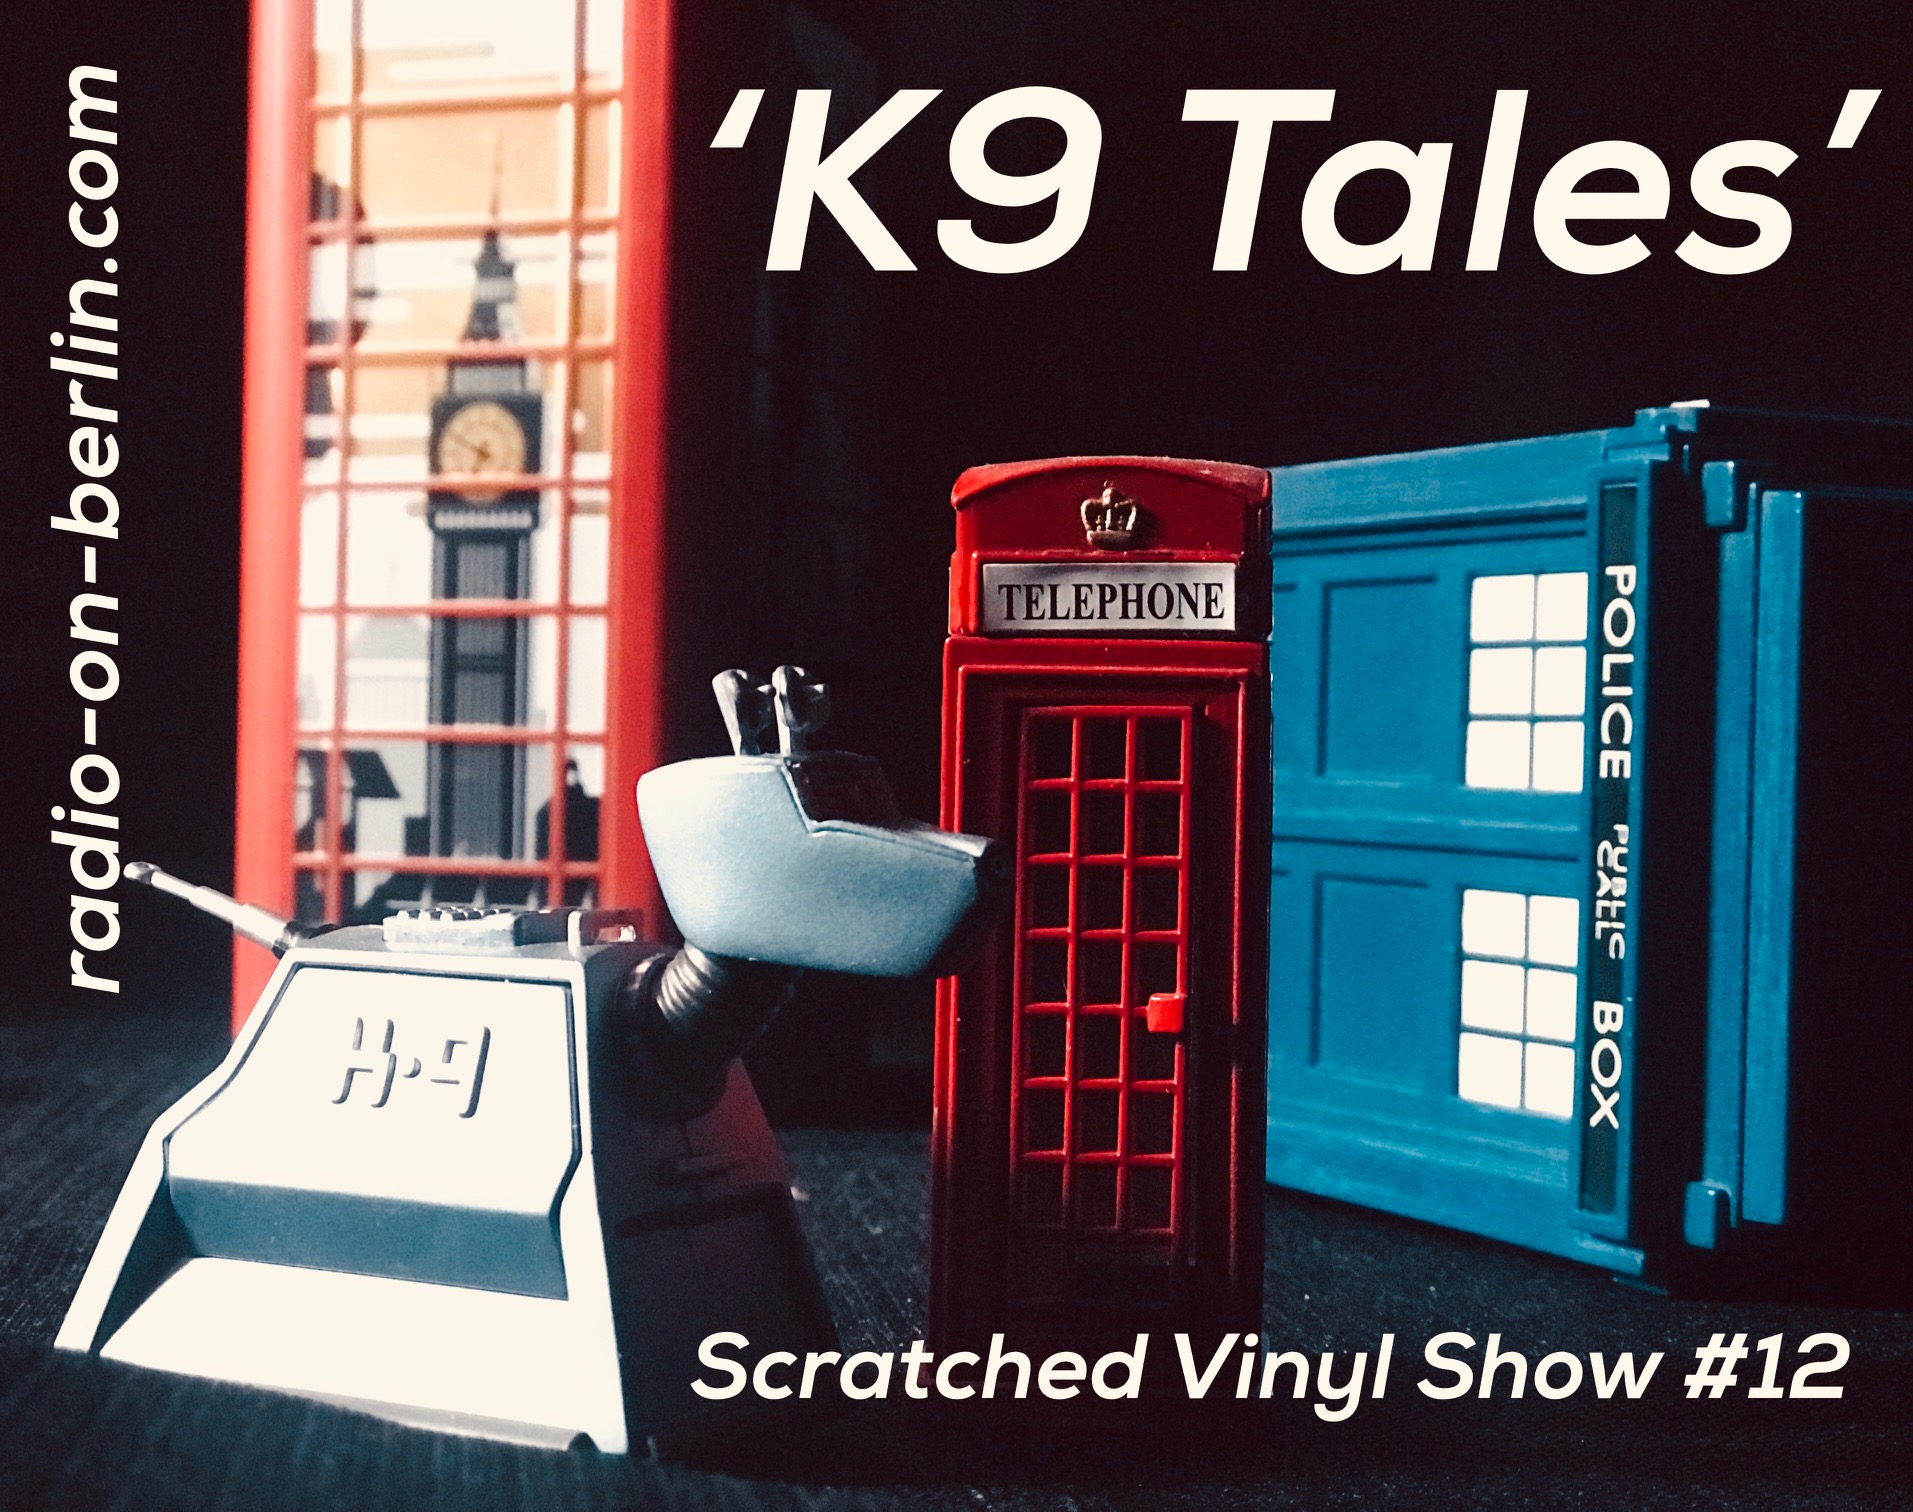 The Scratched Vinyl Show #12 – ‘I remember his tail and more tales …’